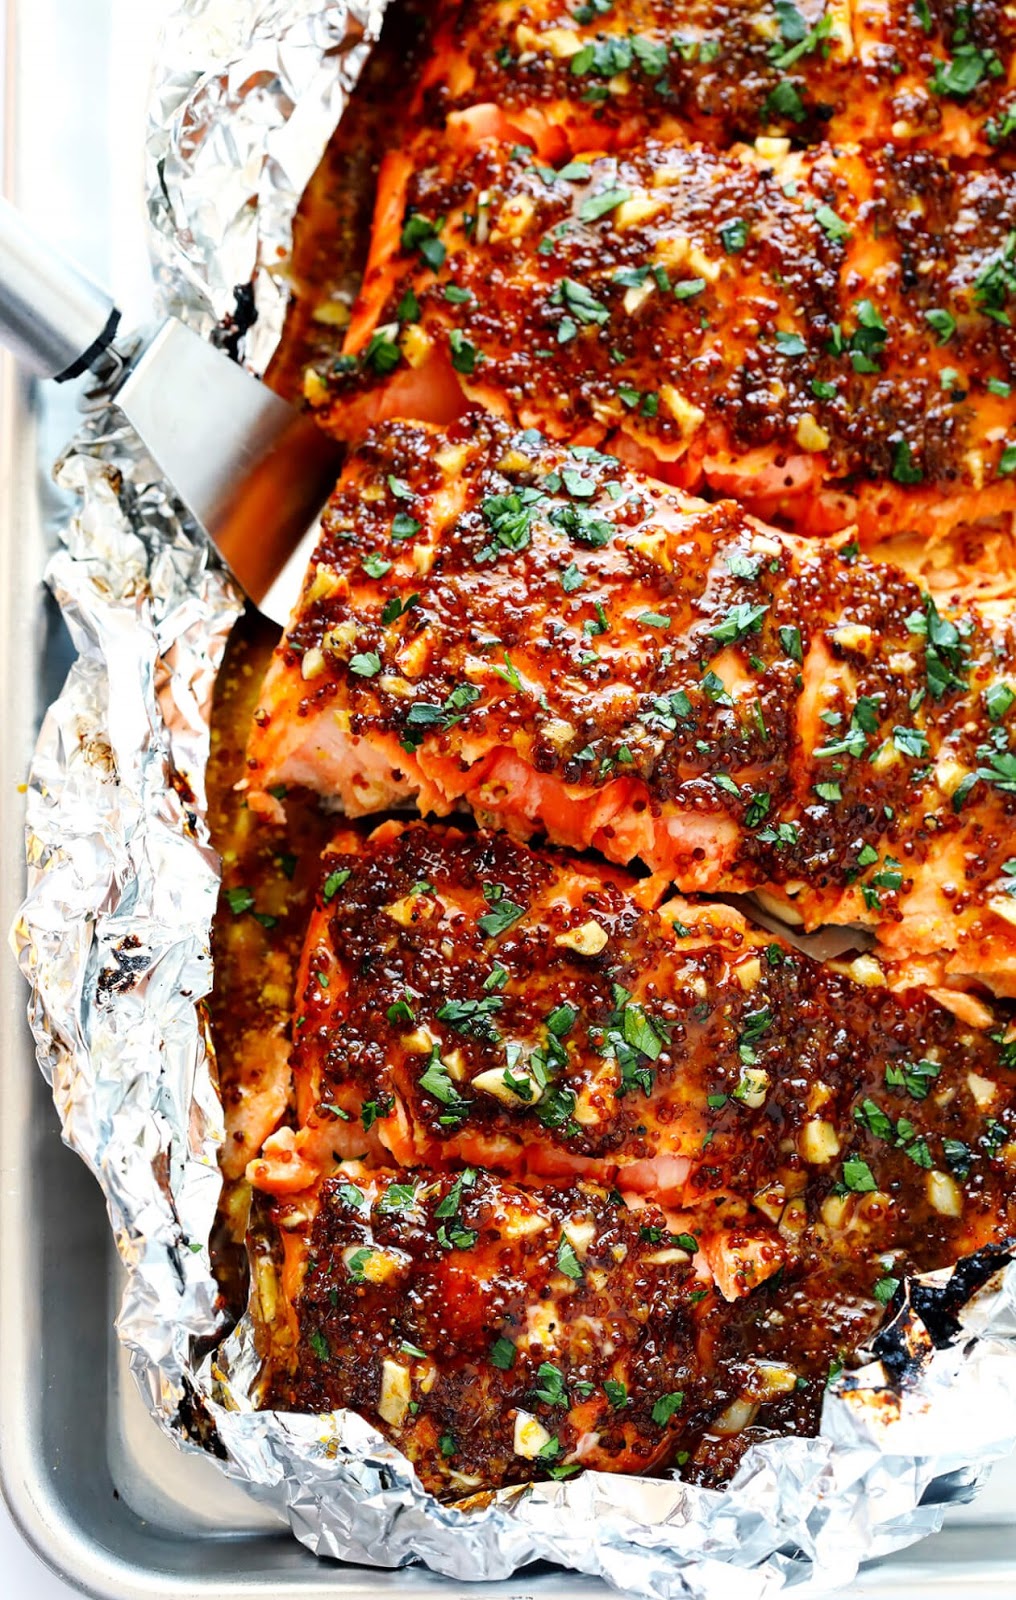 HONEY MUSTARD SALMON IN FOIL #HEALTHYFOOD #SALMON - Media Food and ...